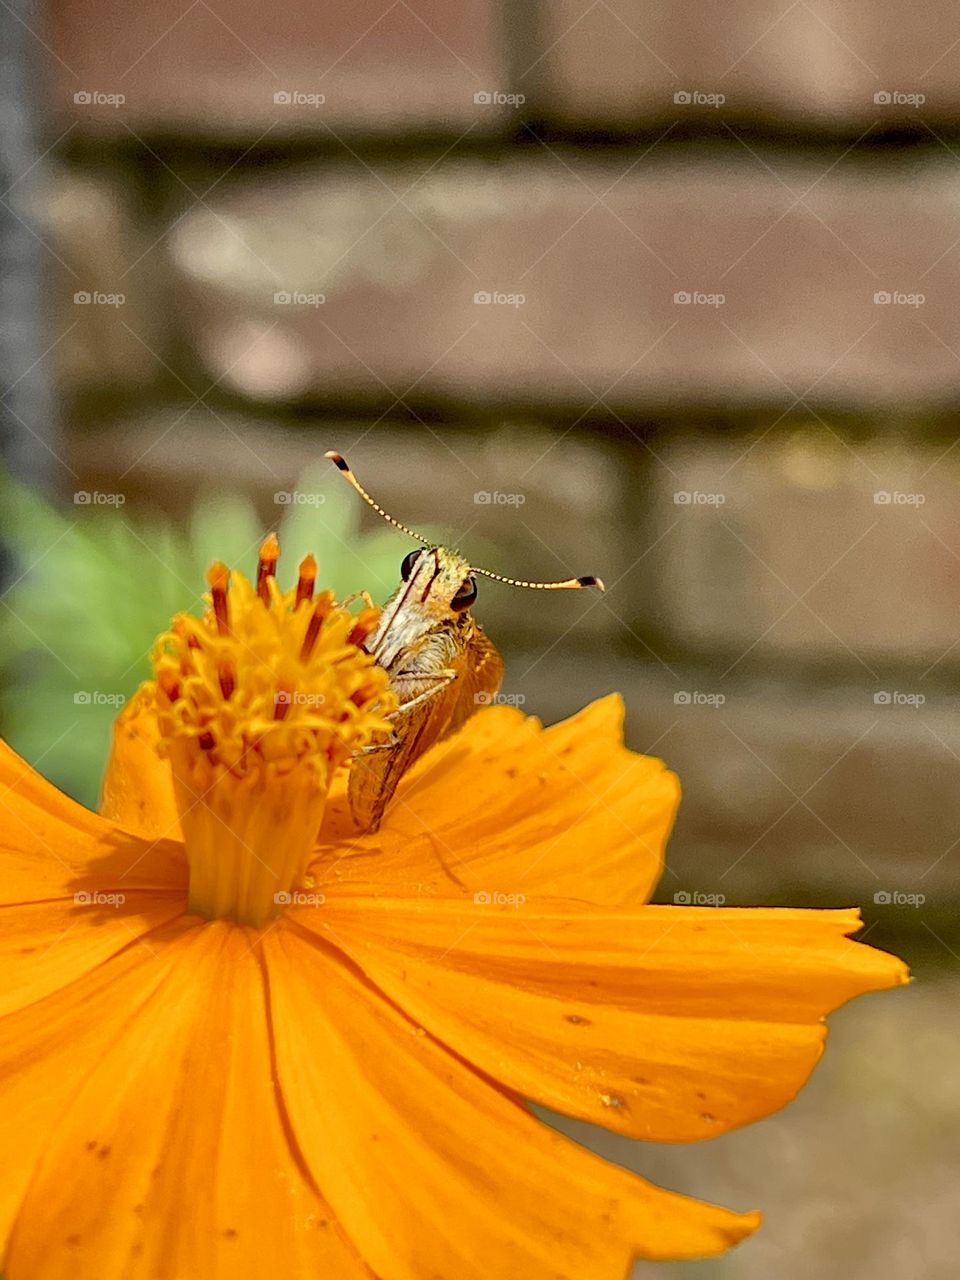 Tiny male sachem butterfly enjoying the orange cosmos blooms on a hot day. His antennae and tongue feature prominently.